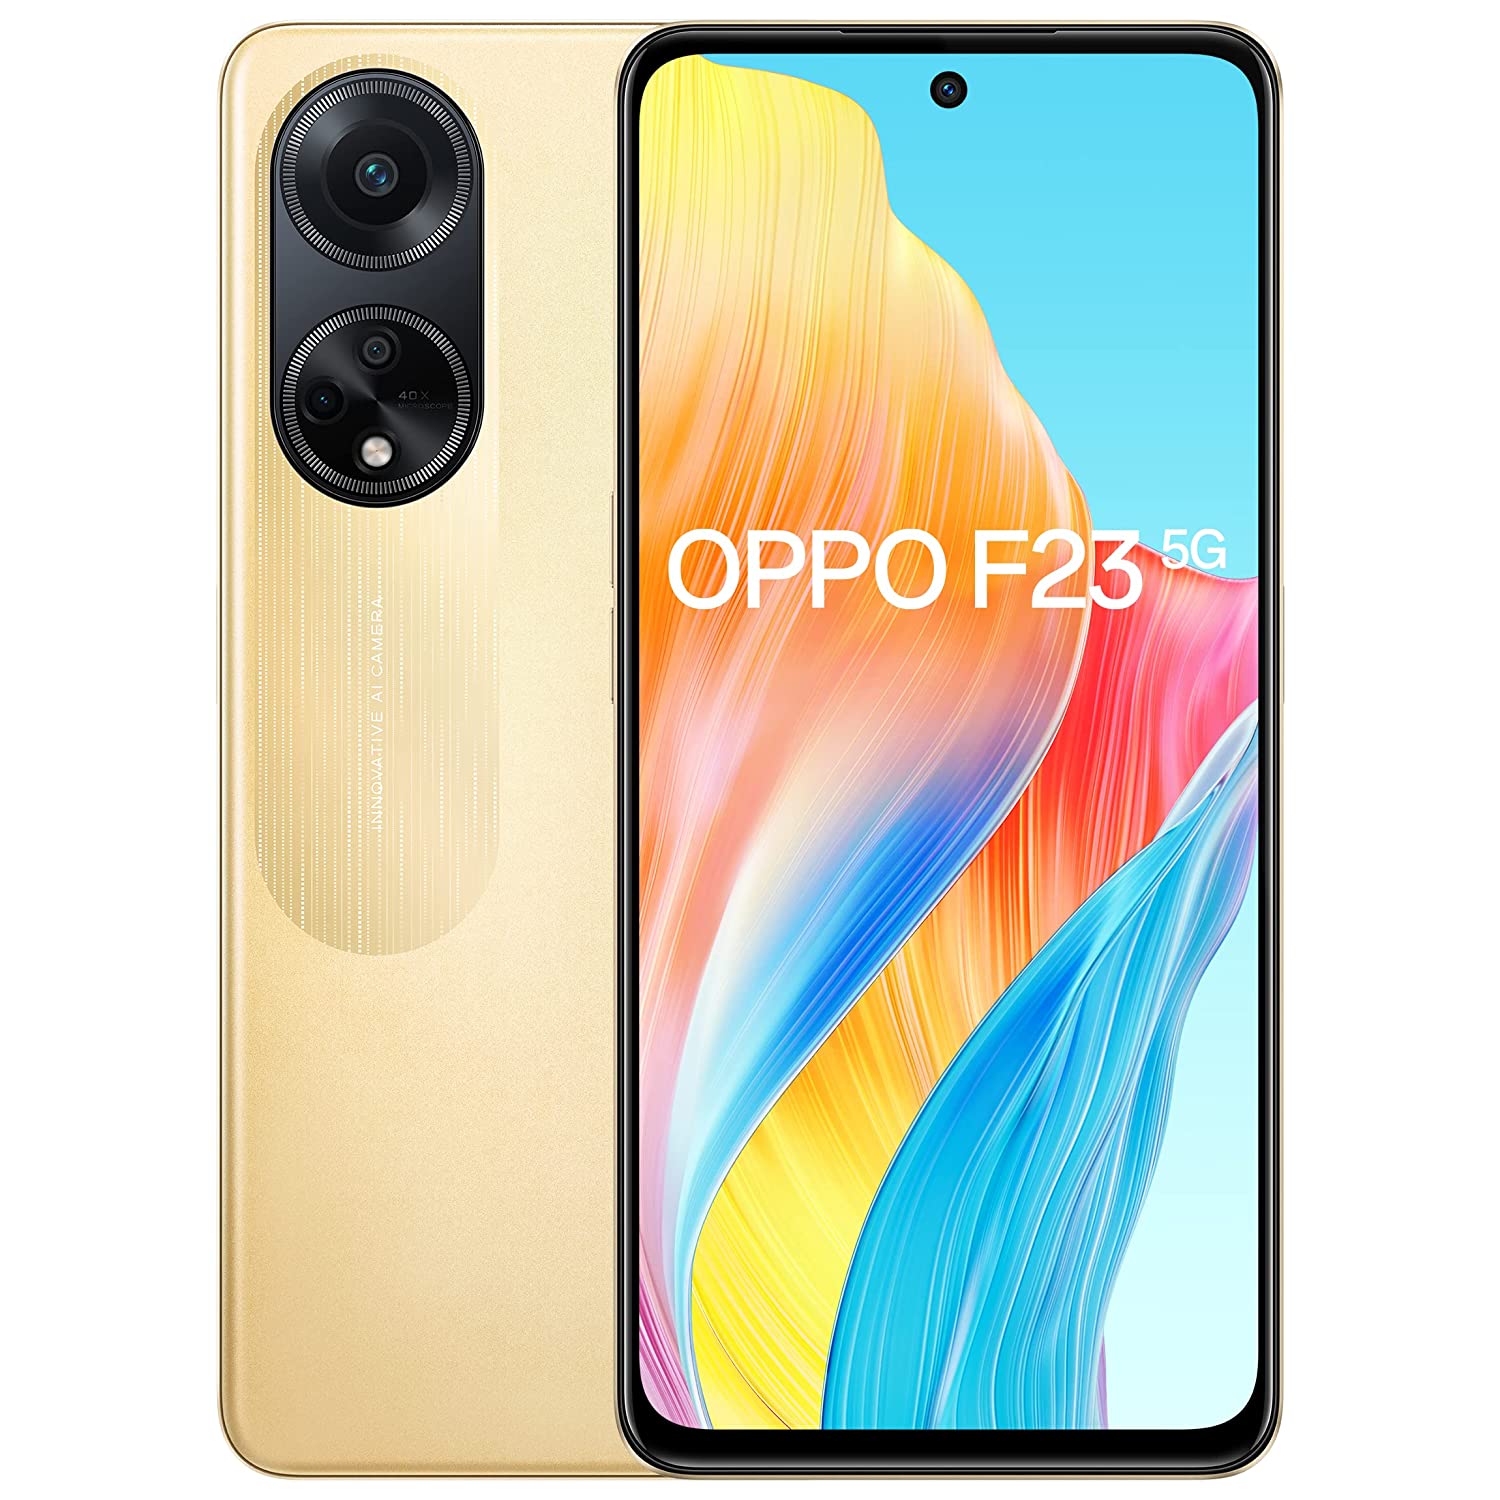 OPPO F23 5G (Bold Gold, 8GB RAM, 256GB Storage) | 5000 mAh Battery with 67W SUPERVOOC Charger | 64MP Rear Triple AI Camera with Microlens | 6.72" FHD+ 120Hz Display